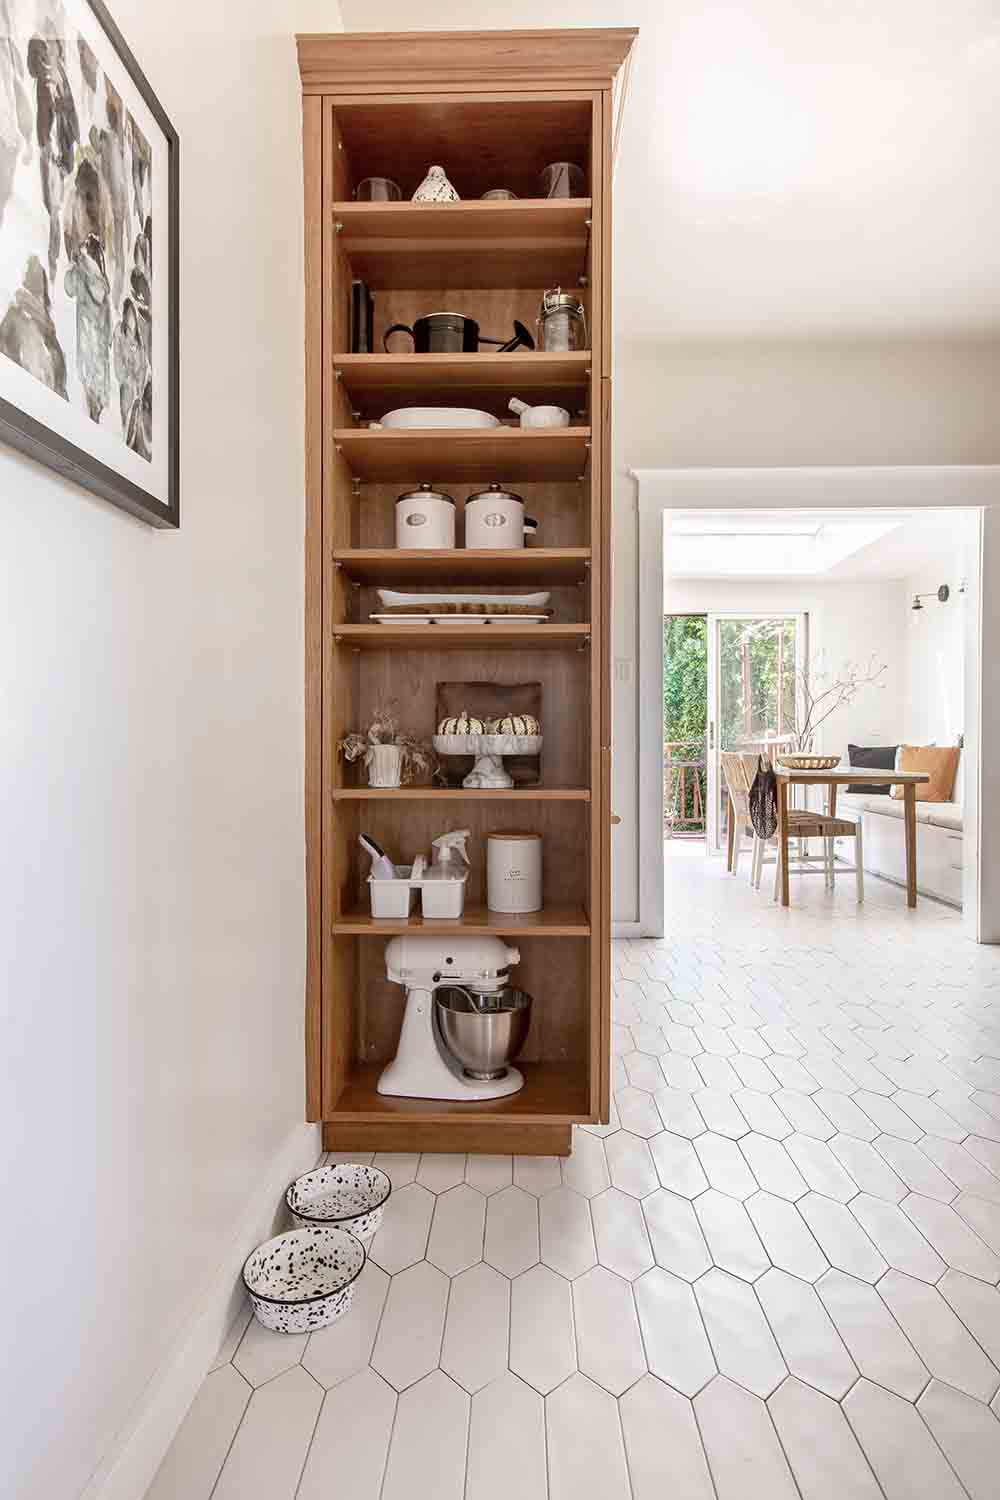 A tall cabinet with shelving for kitchen storage.